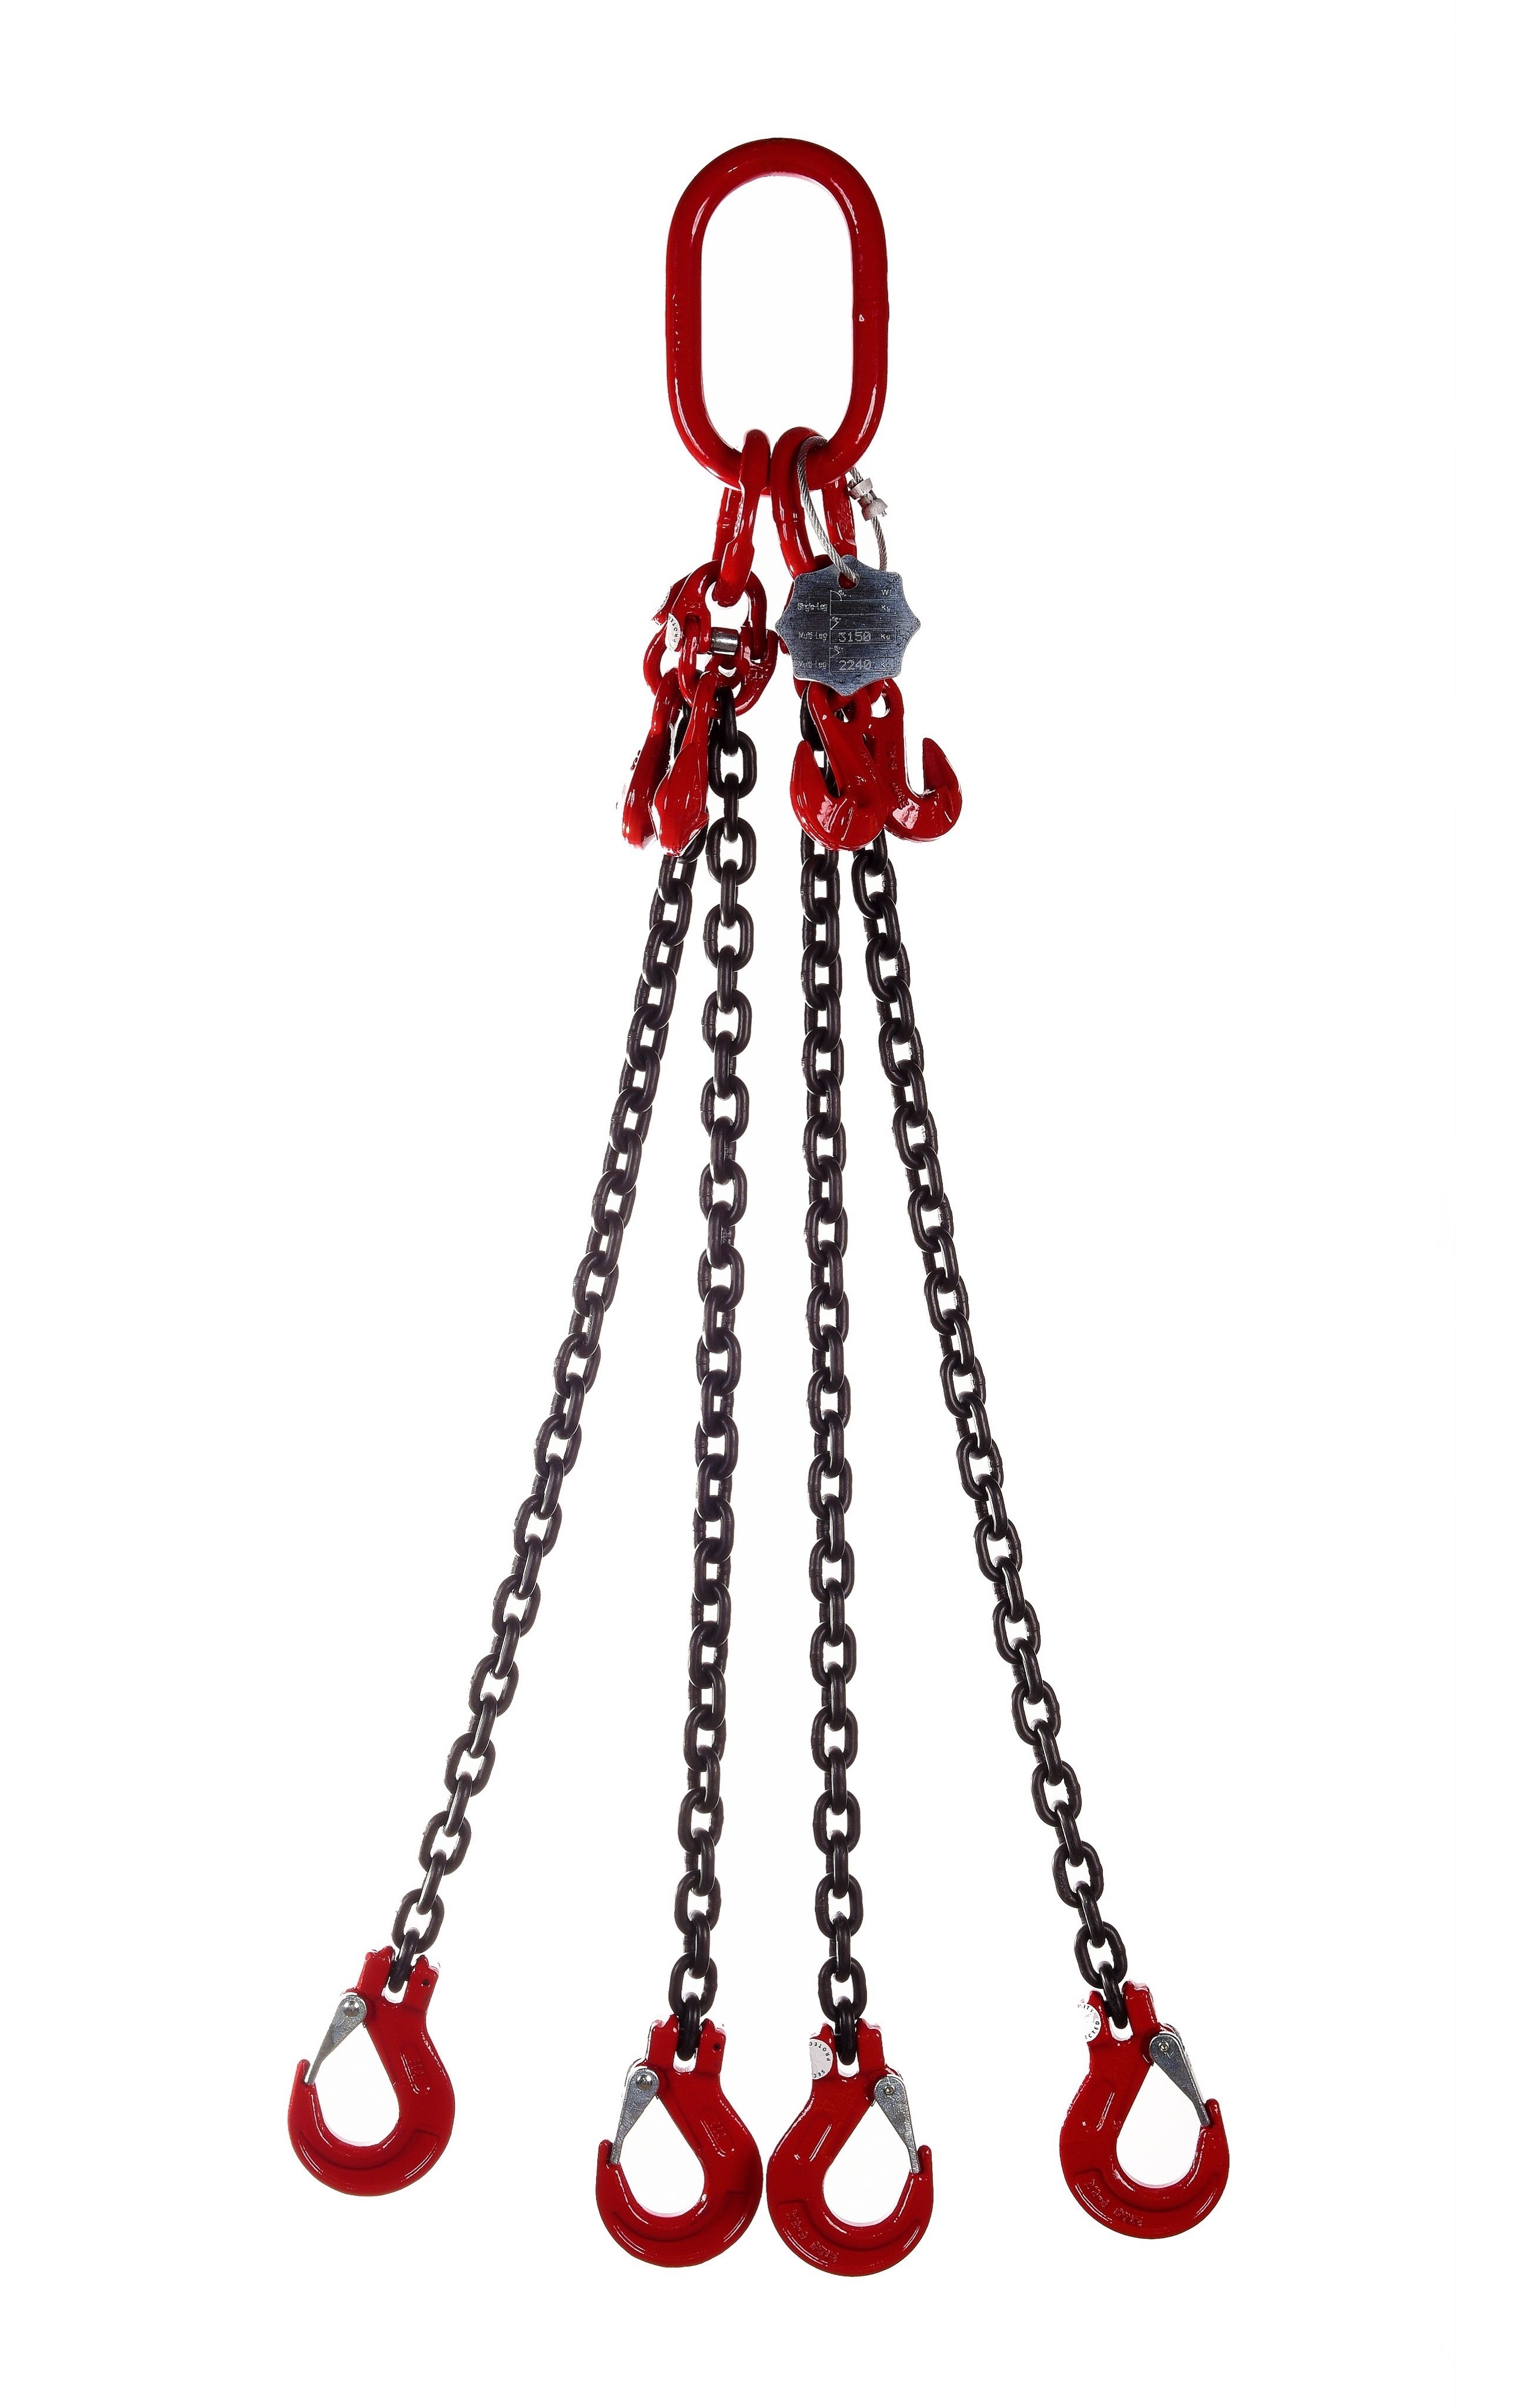 4 Leg 26.5tonne 20mm Lifting Chain Sling with choice of length and hooks – With Shortening Hook – 1mtr – Clevis Sling Hook – Chain Slings – WSB